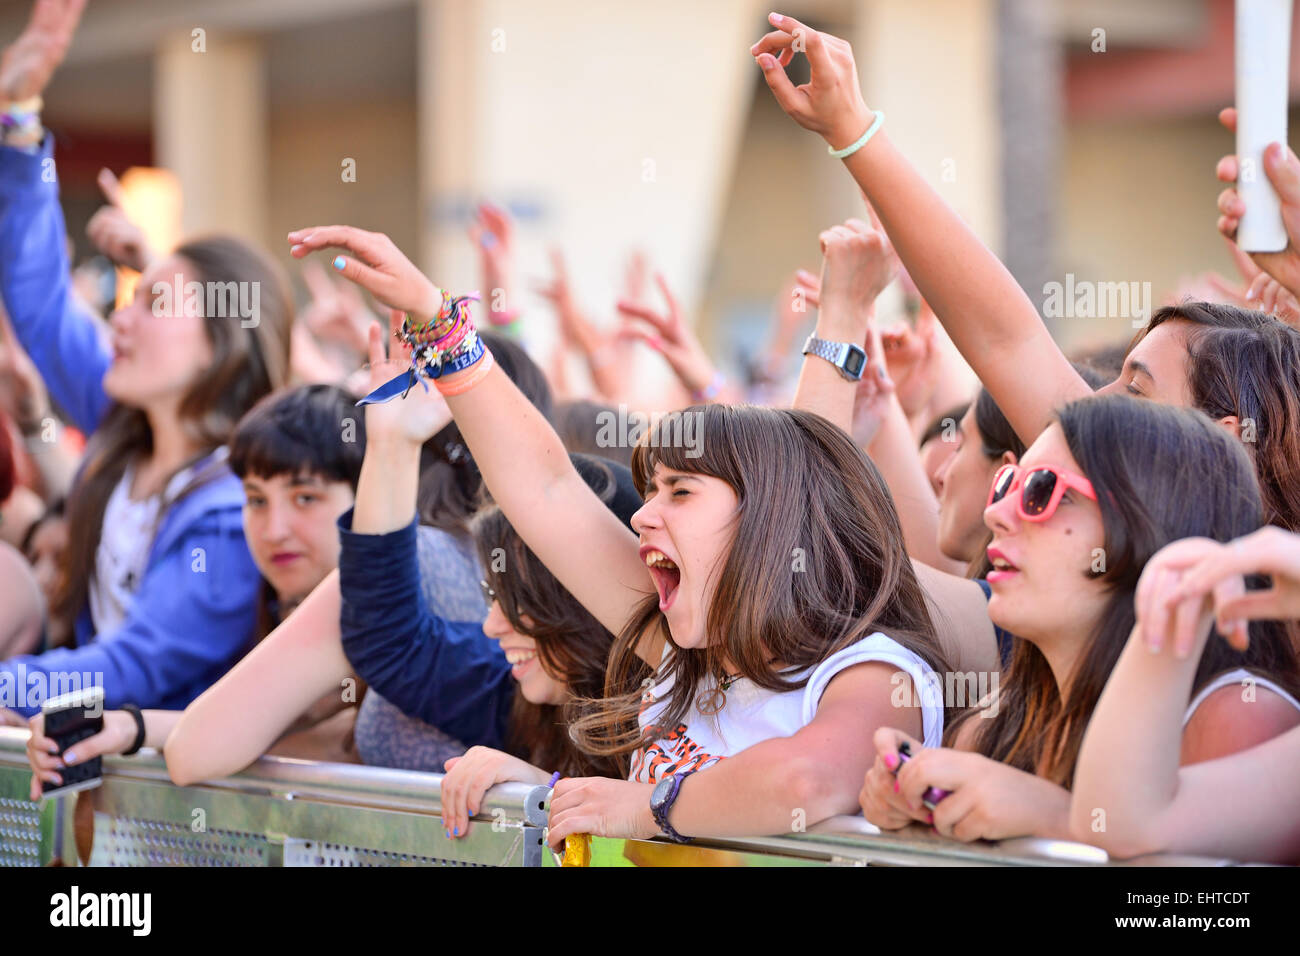 BARCELONA - MAY 23: Girls from the audience in front of the stage, cheering on their idols at the Primavera Pop. Stock Photo